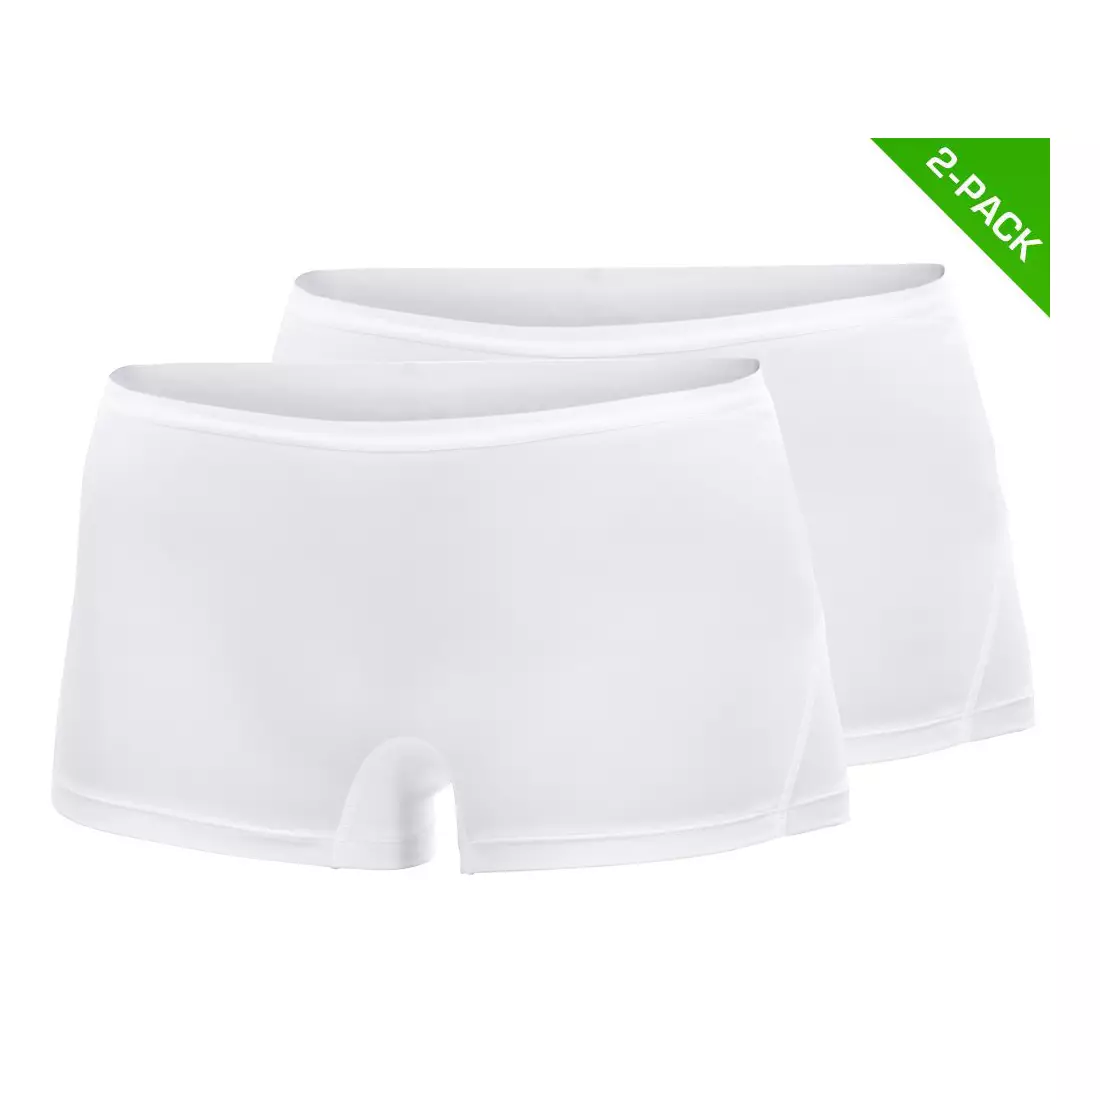 CRAFT STAY COOL - 1901977-1900 - women's thermoactive boxers - TWO-PACK